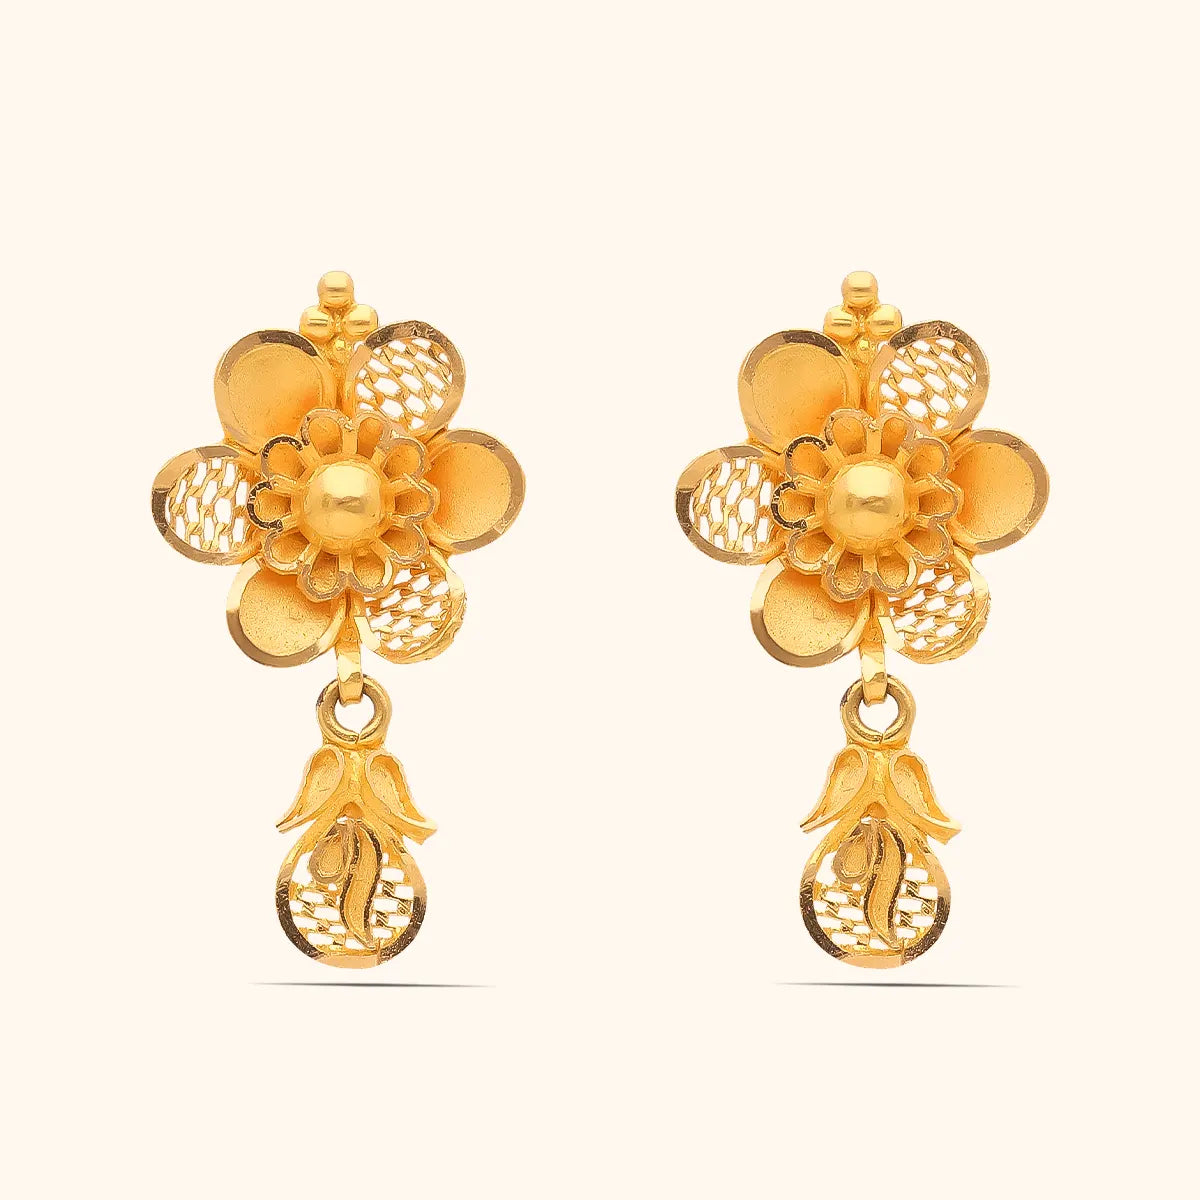 Yellow Chimes Flower Design Stone Studded Hoop Style Dangler Detail Earrings  Gold & White Online in India, Buy at Best Price from Firstcry.com - 13157491